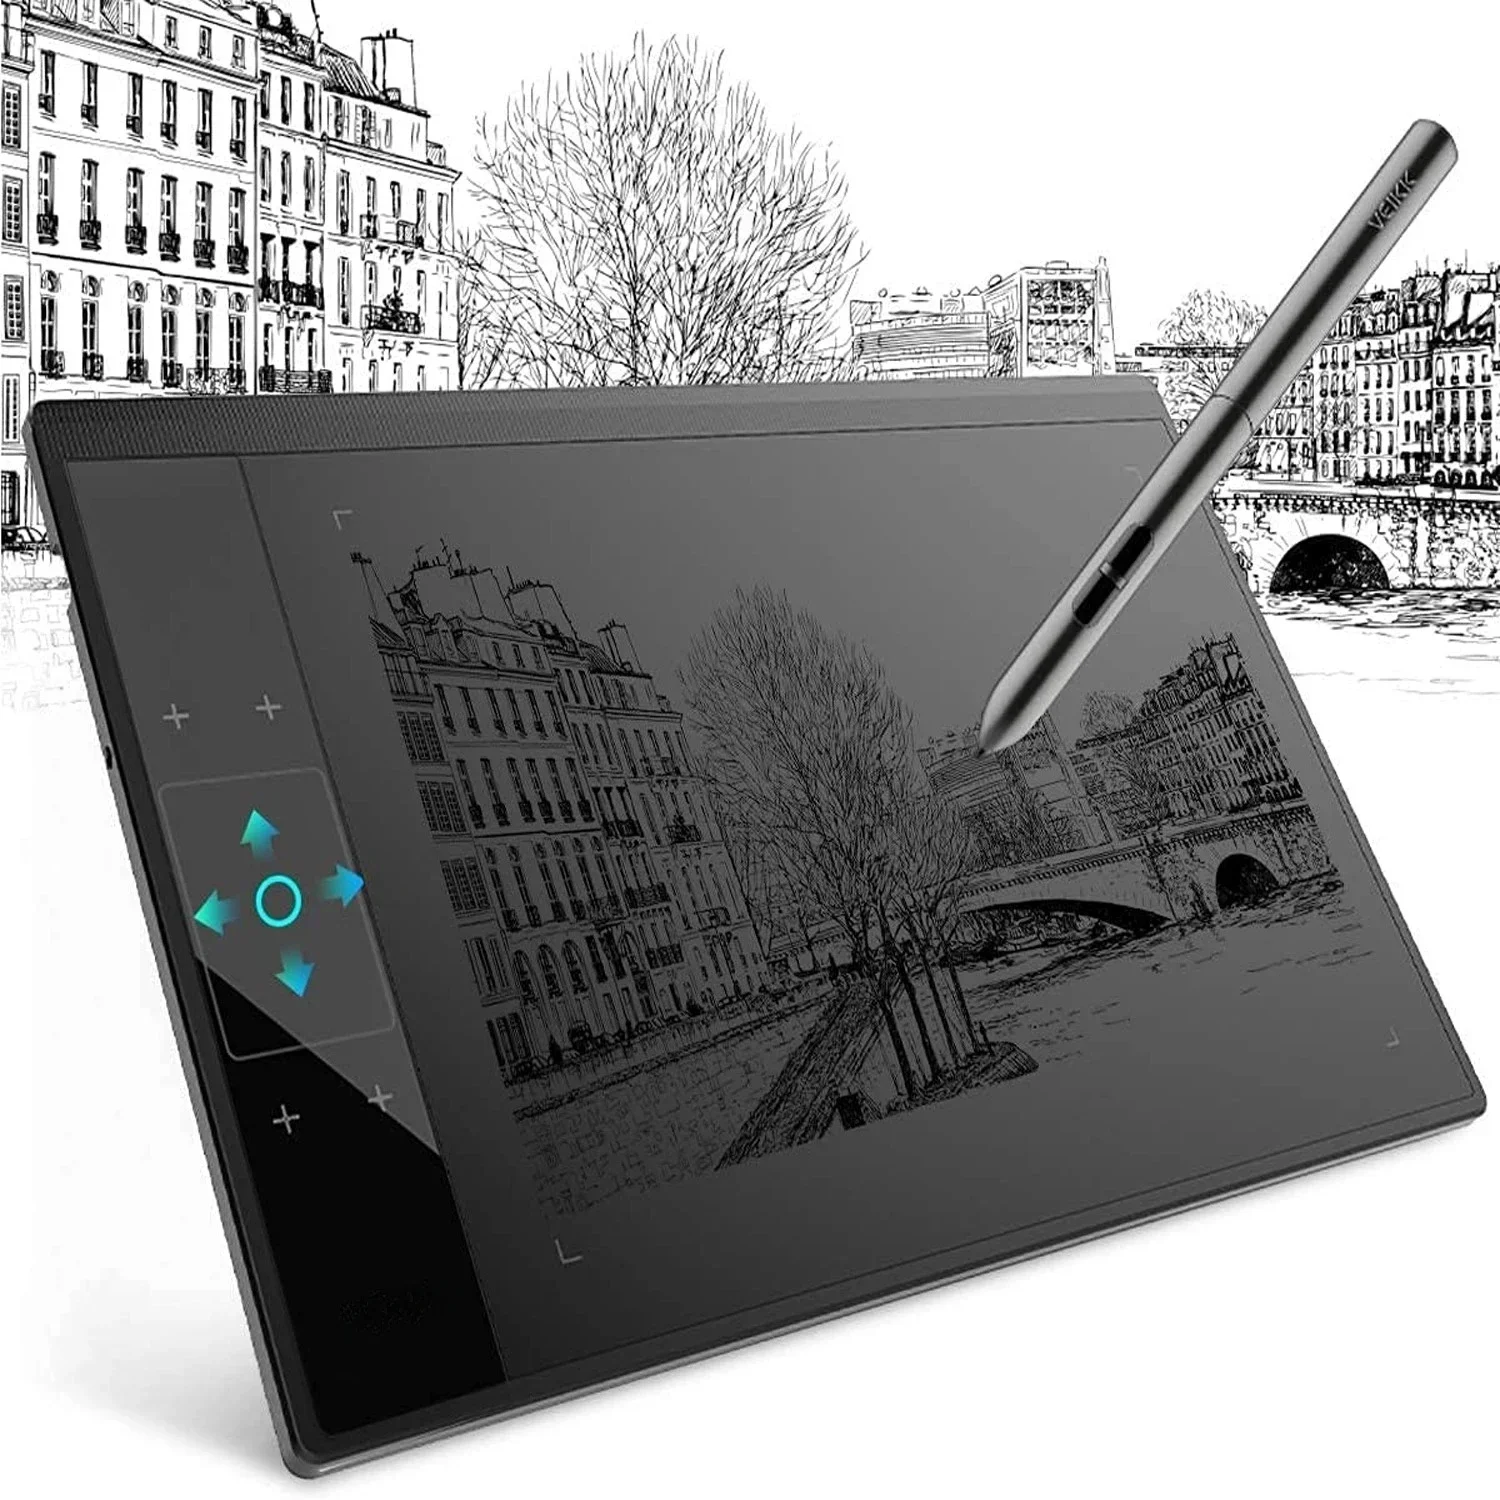 10*6 inch Touch Screen Graphics Digital Drawing Tablet 8192 Level Pen Battery-Free Stylus for Android Window Phone Mac OSU Game